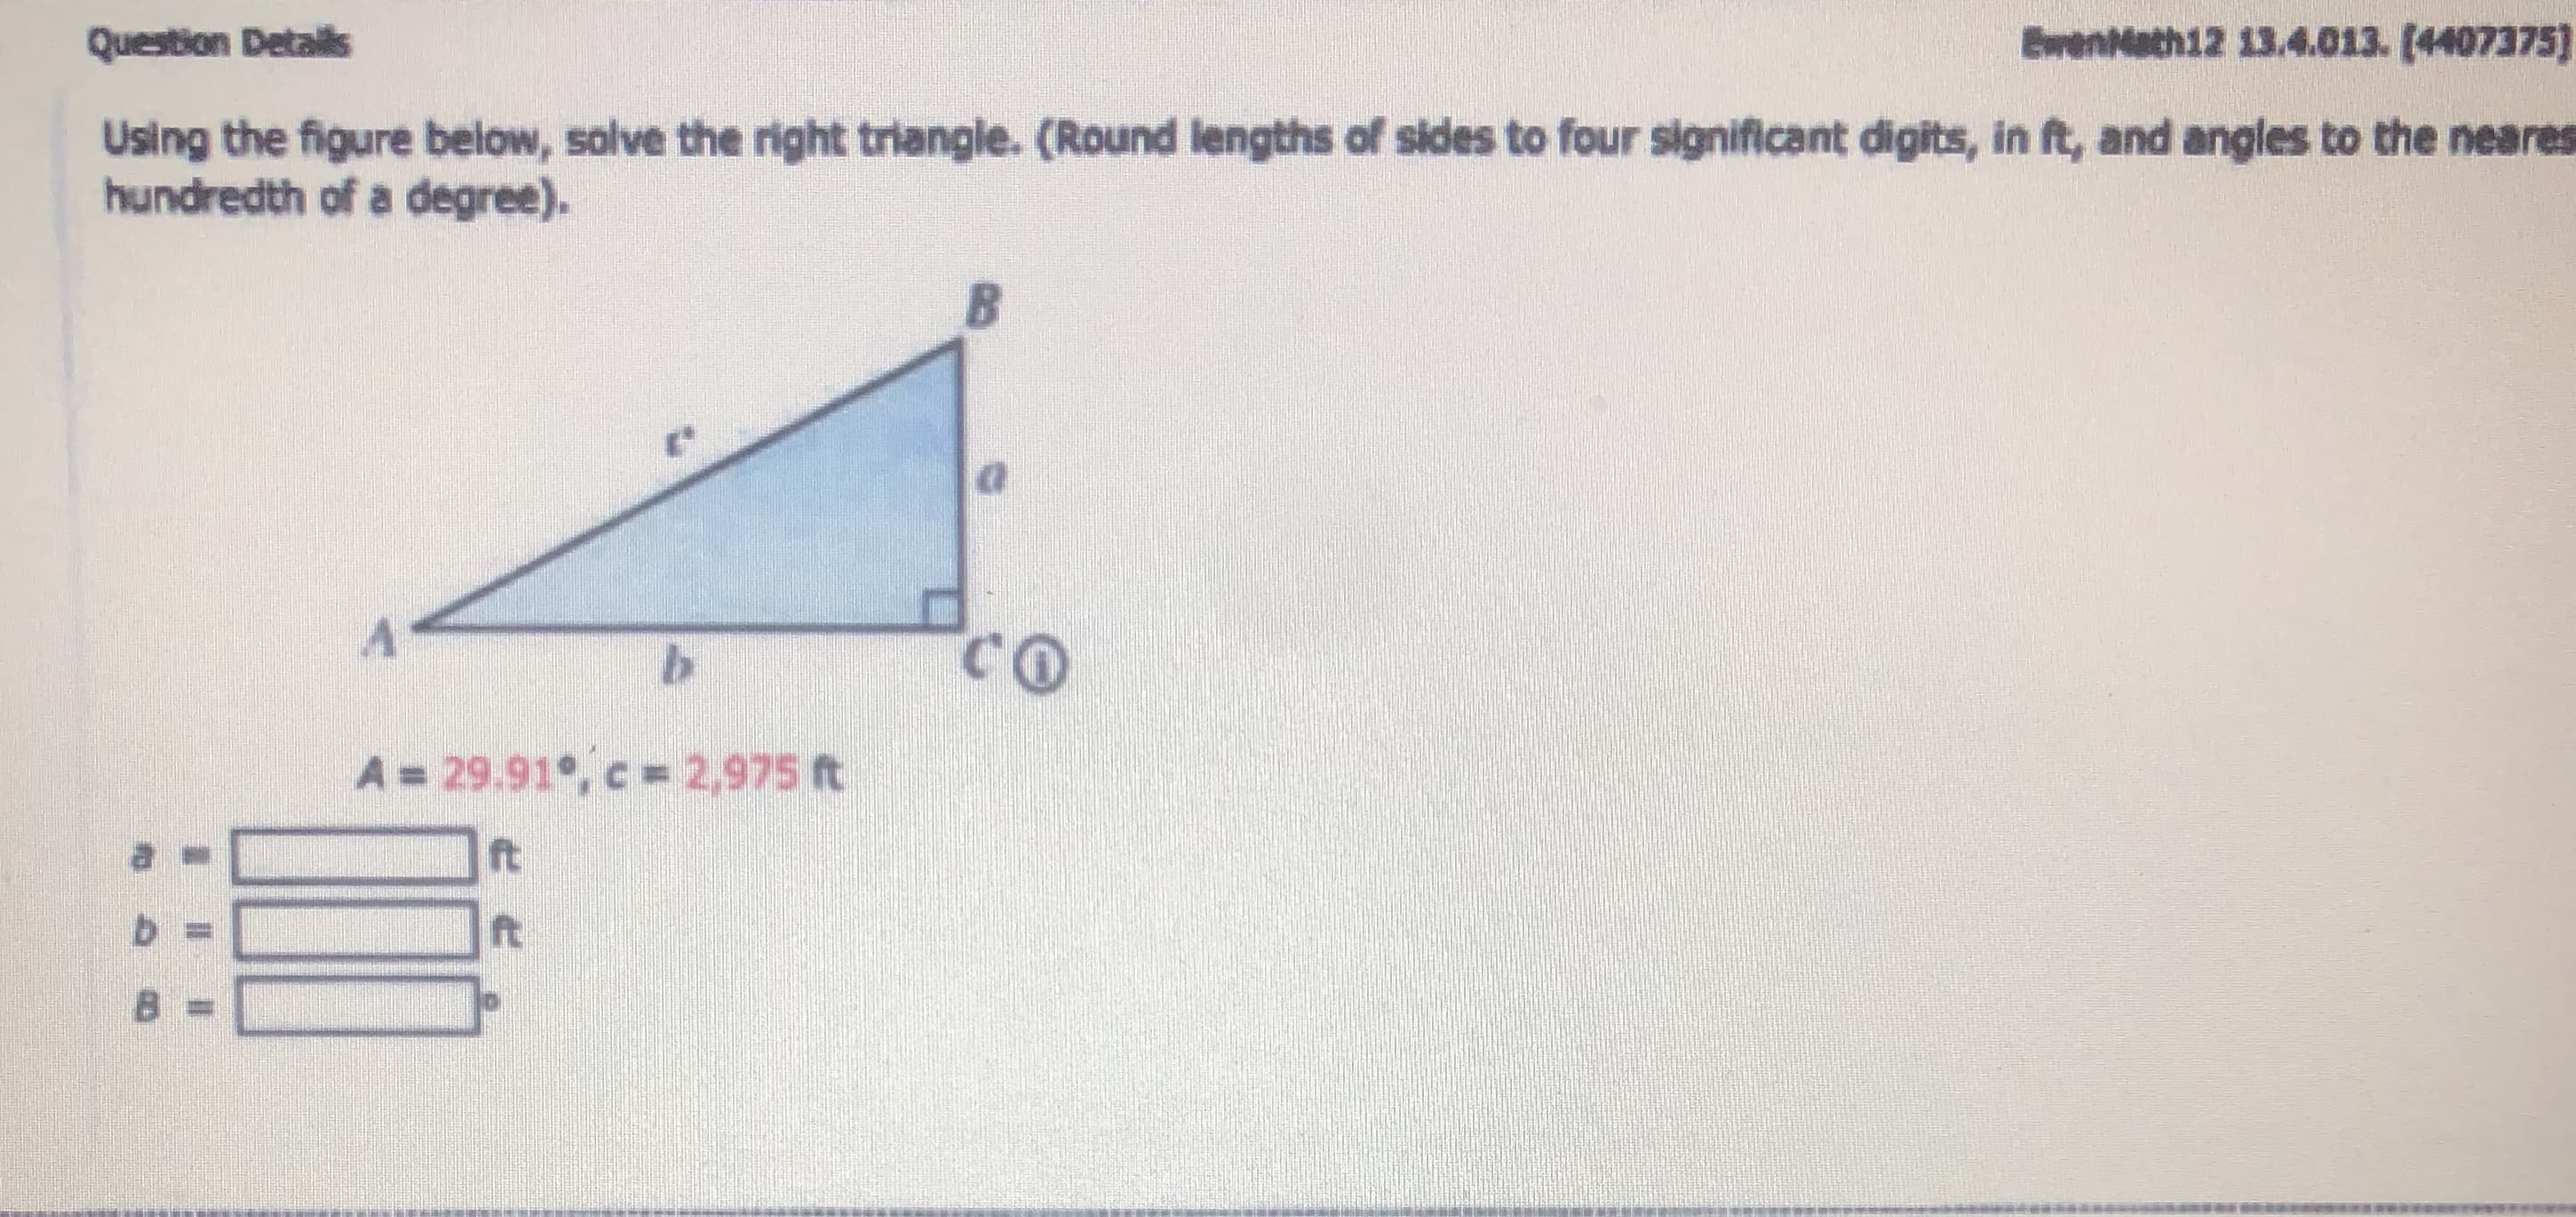 Using the figure below, solve the right triangle. (Round lengths of sides to four signiflicant digits, in ft, and angles to the nearn
hundredth of a degree).
A = 29.91, c = 2,975 ft
ft
